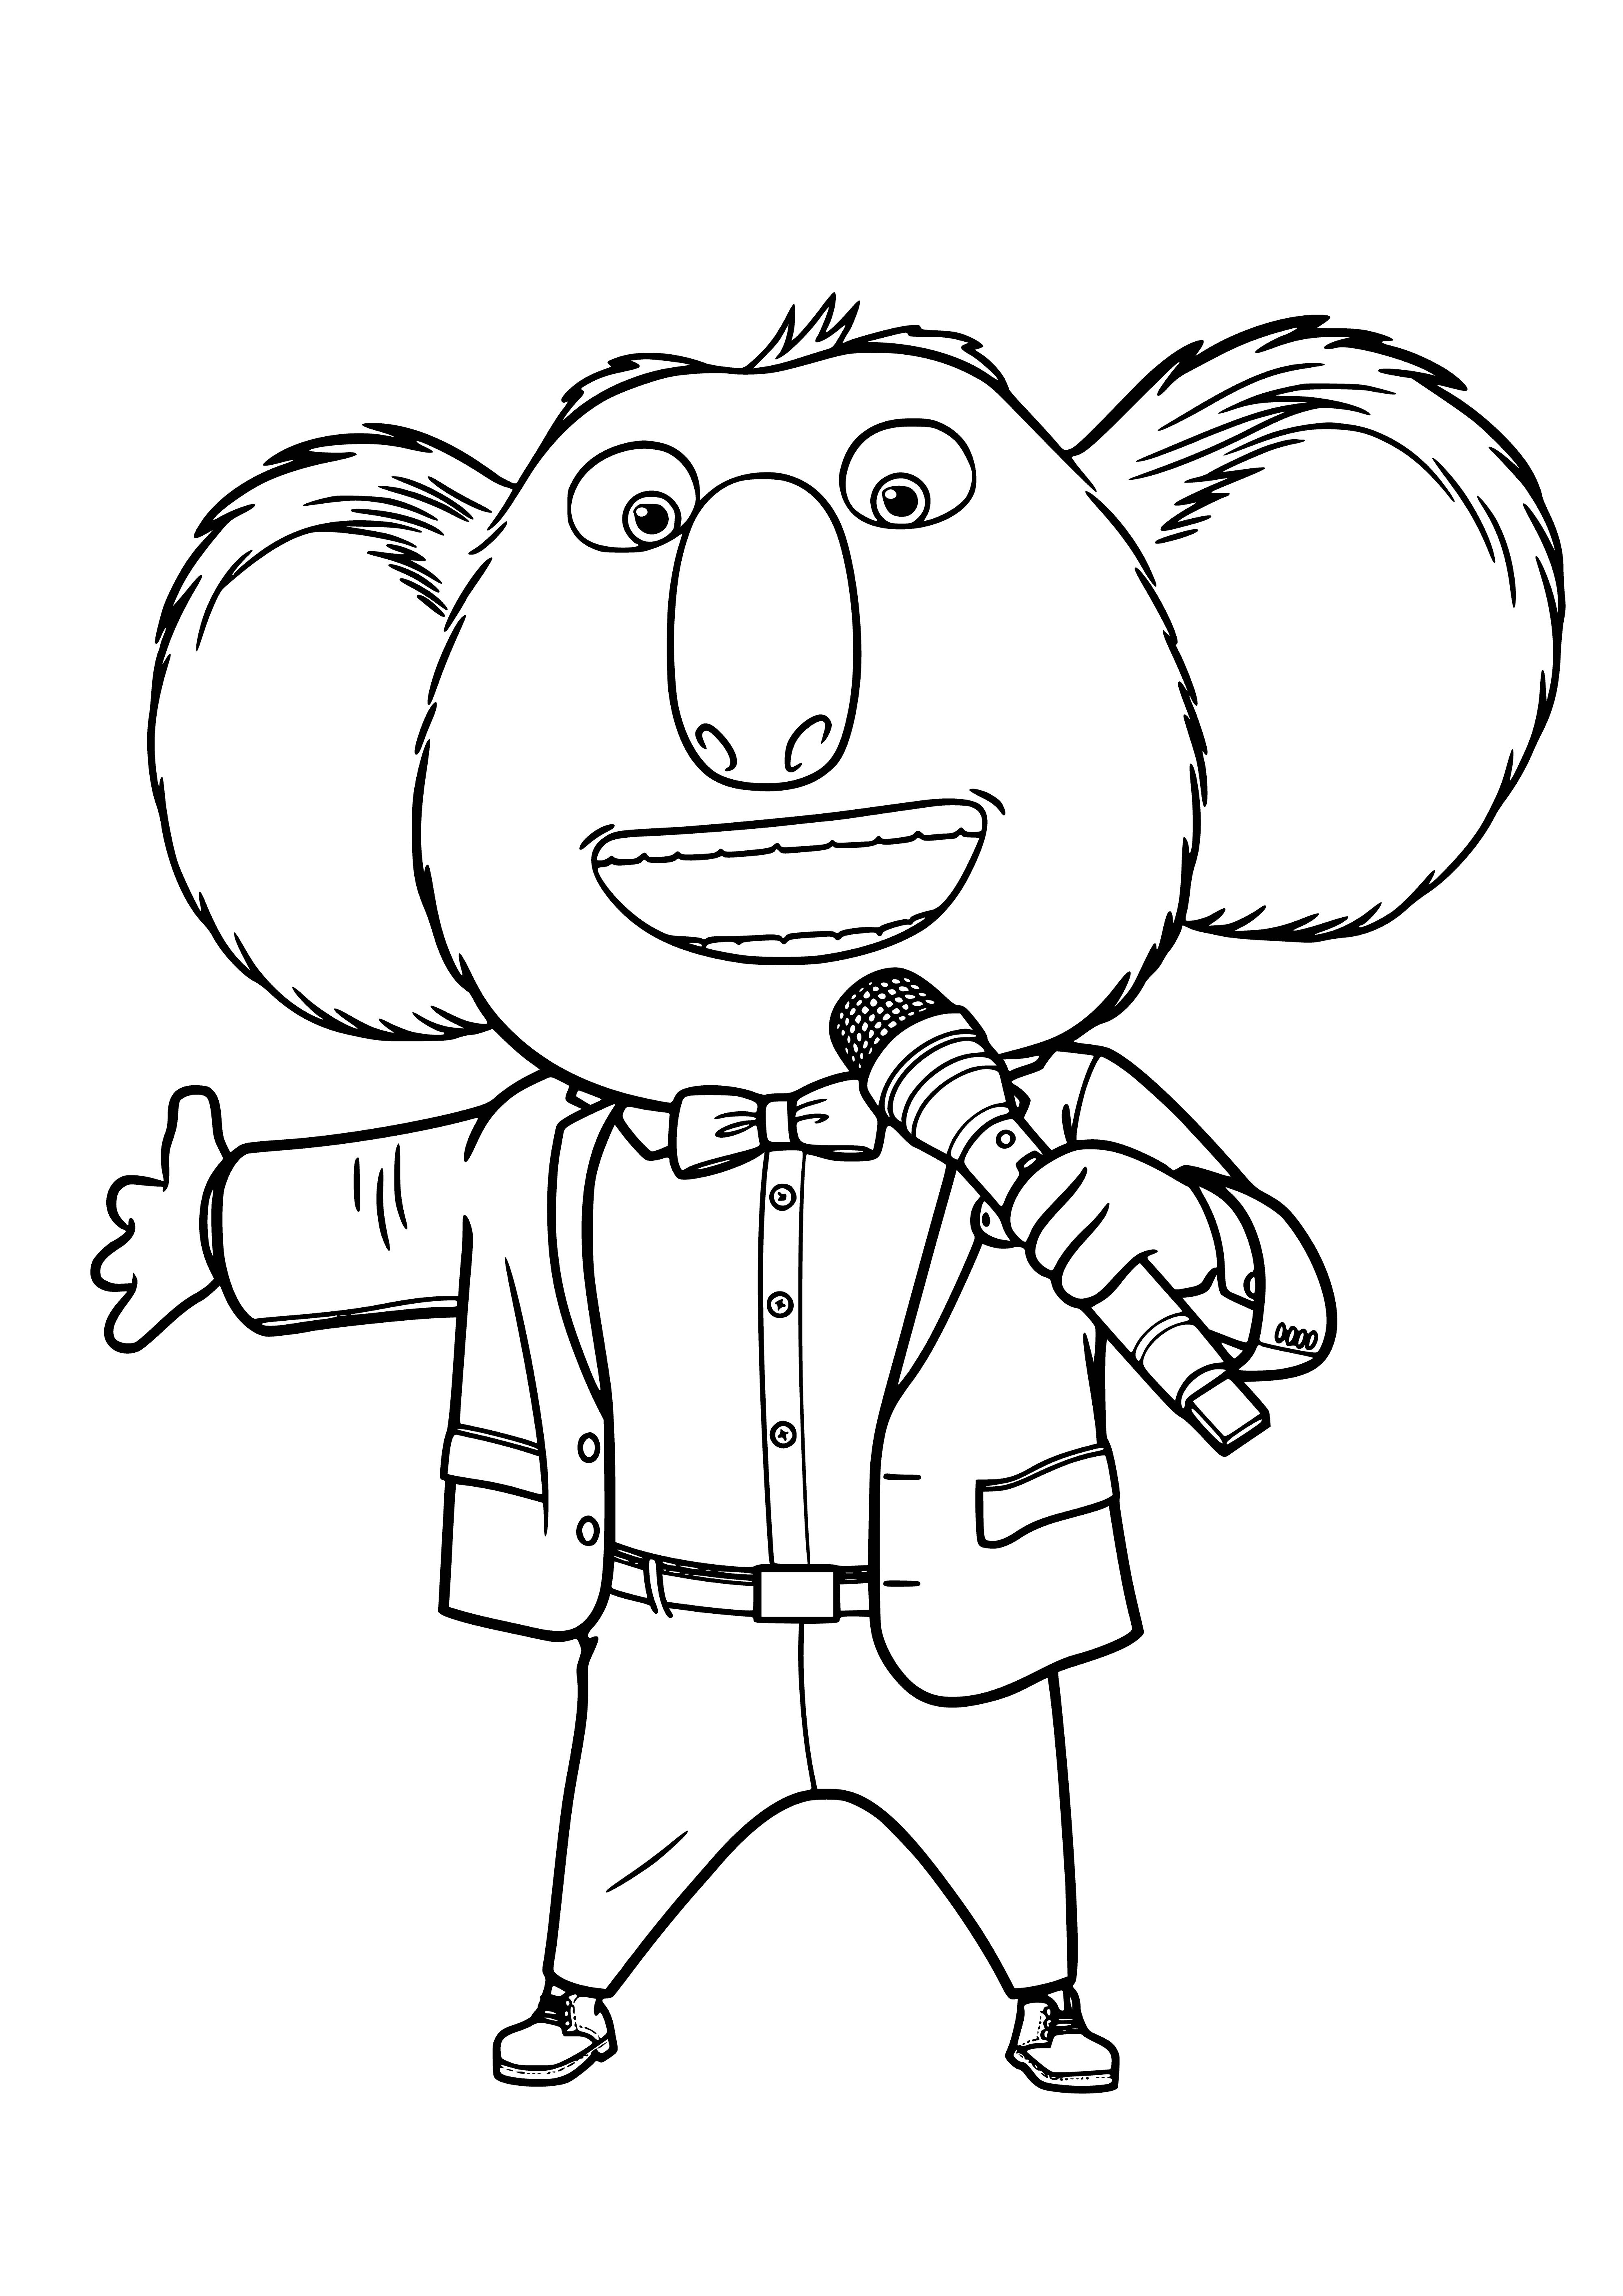 coloring page: Koala sits on red eucalyptus branch looking left at something off the page.